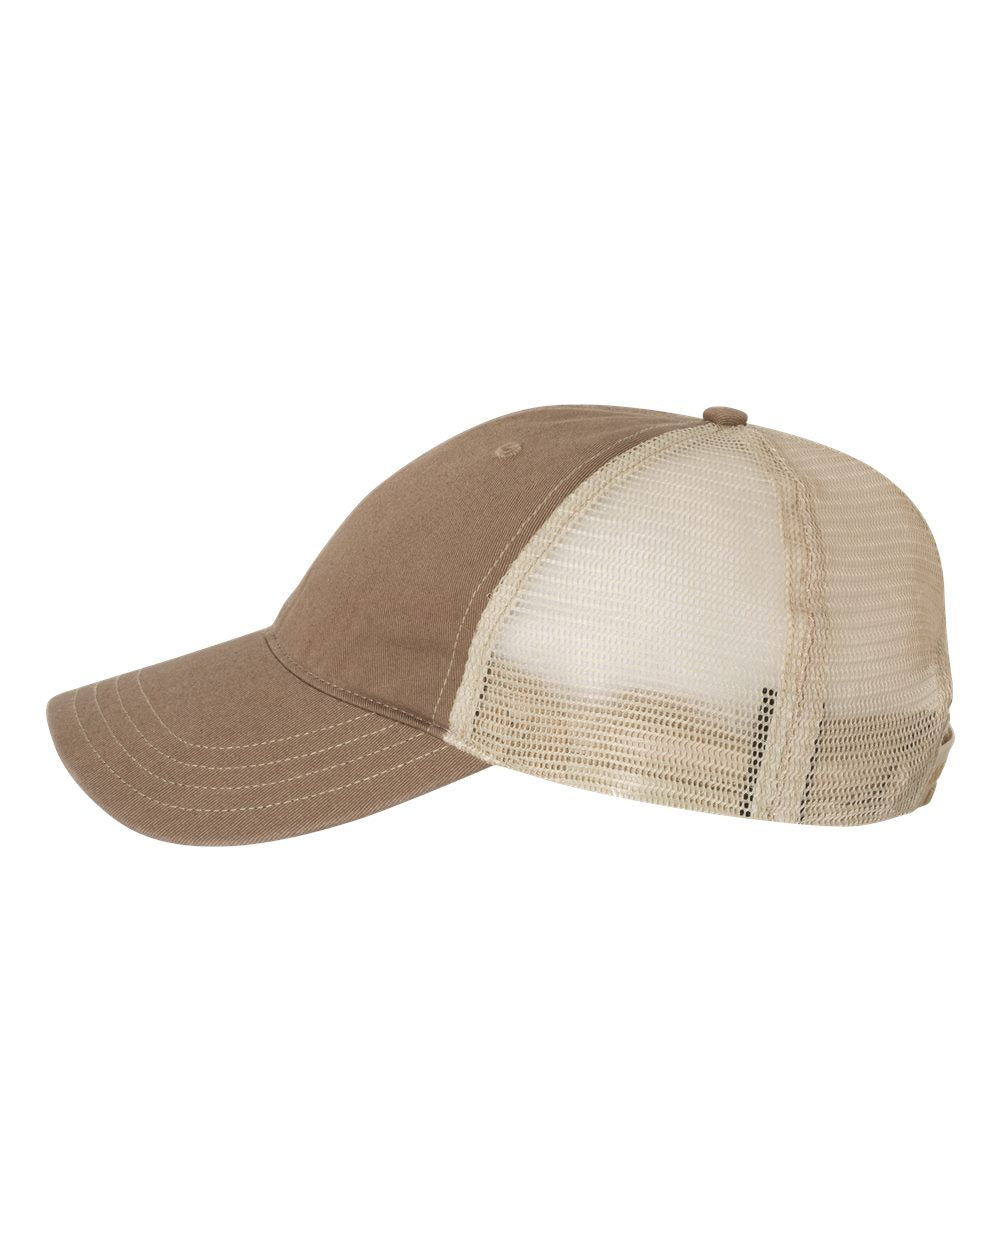 Image of the Kelly Hughes Band Driftwood Cap, featuring a classic design with subtle logo embroidery, perfect for adding understated cool to any outfit.